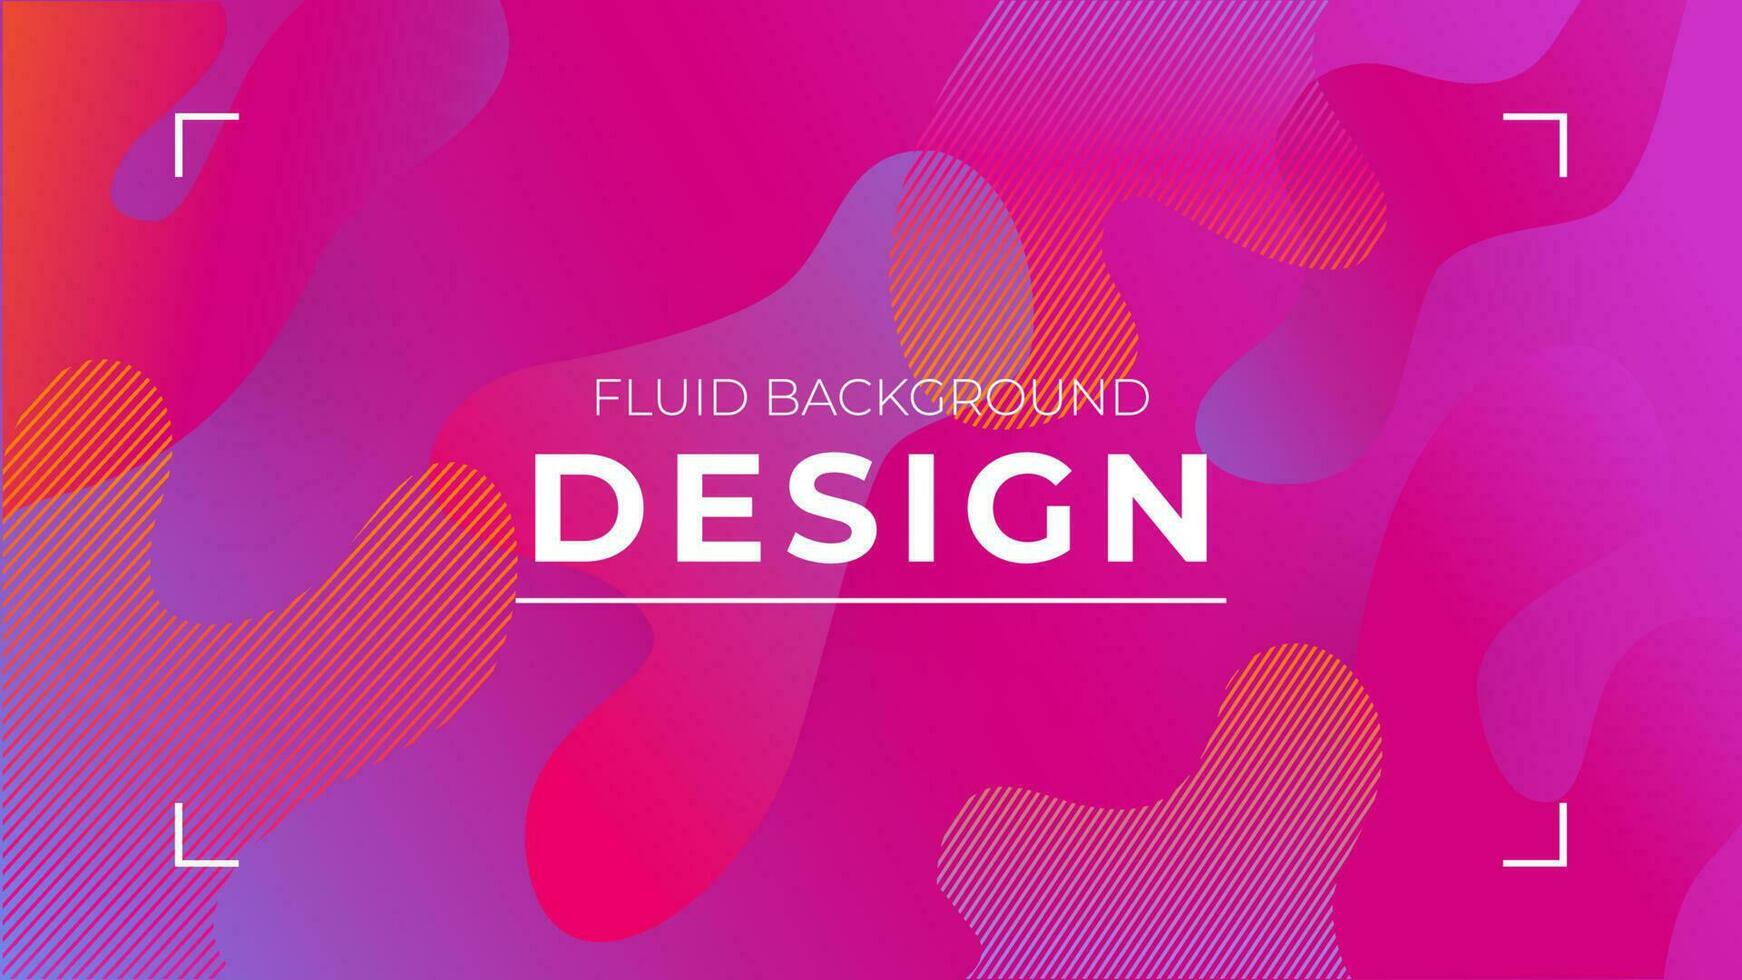 Fluid colorful background design. Liquid gradient shapes composition. Vector layout for websites, banners, presentations, posters and invitations.